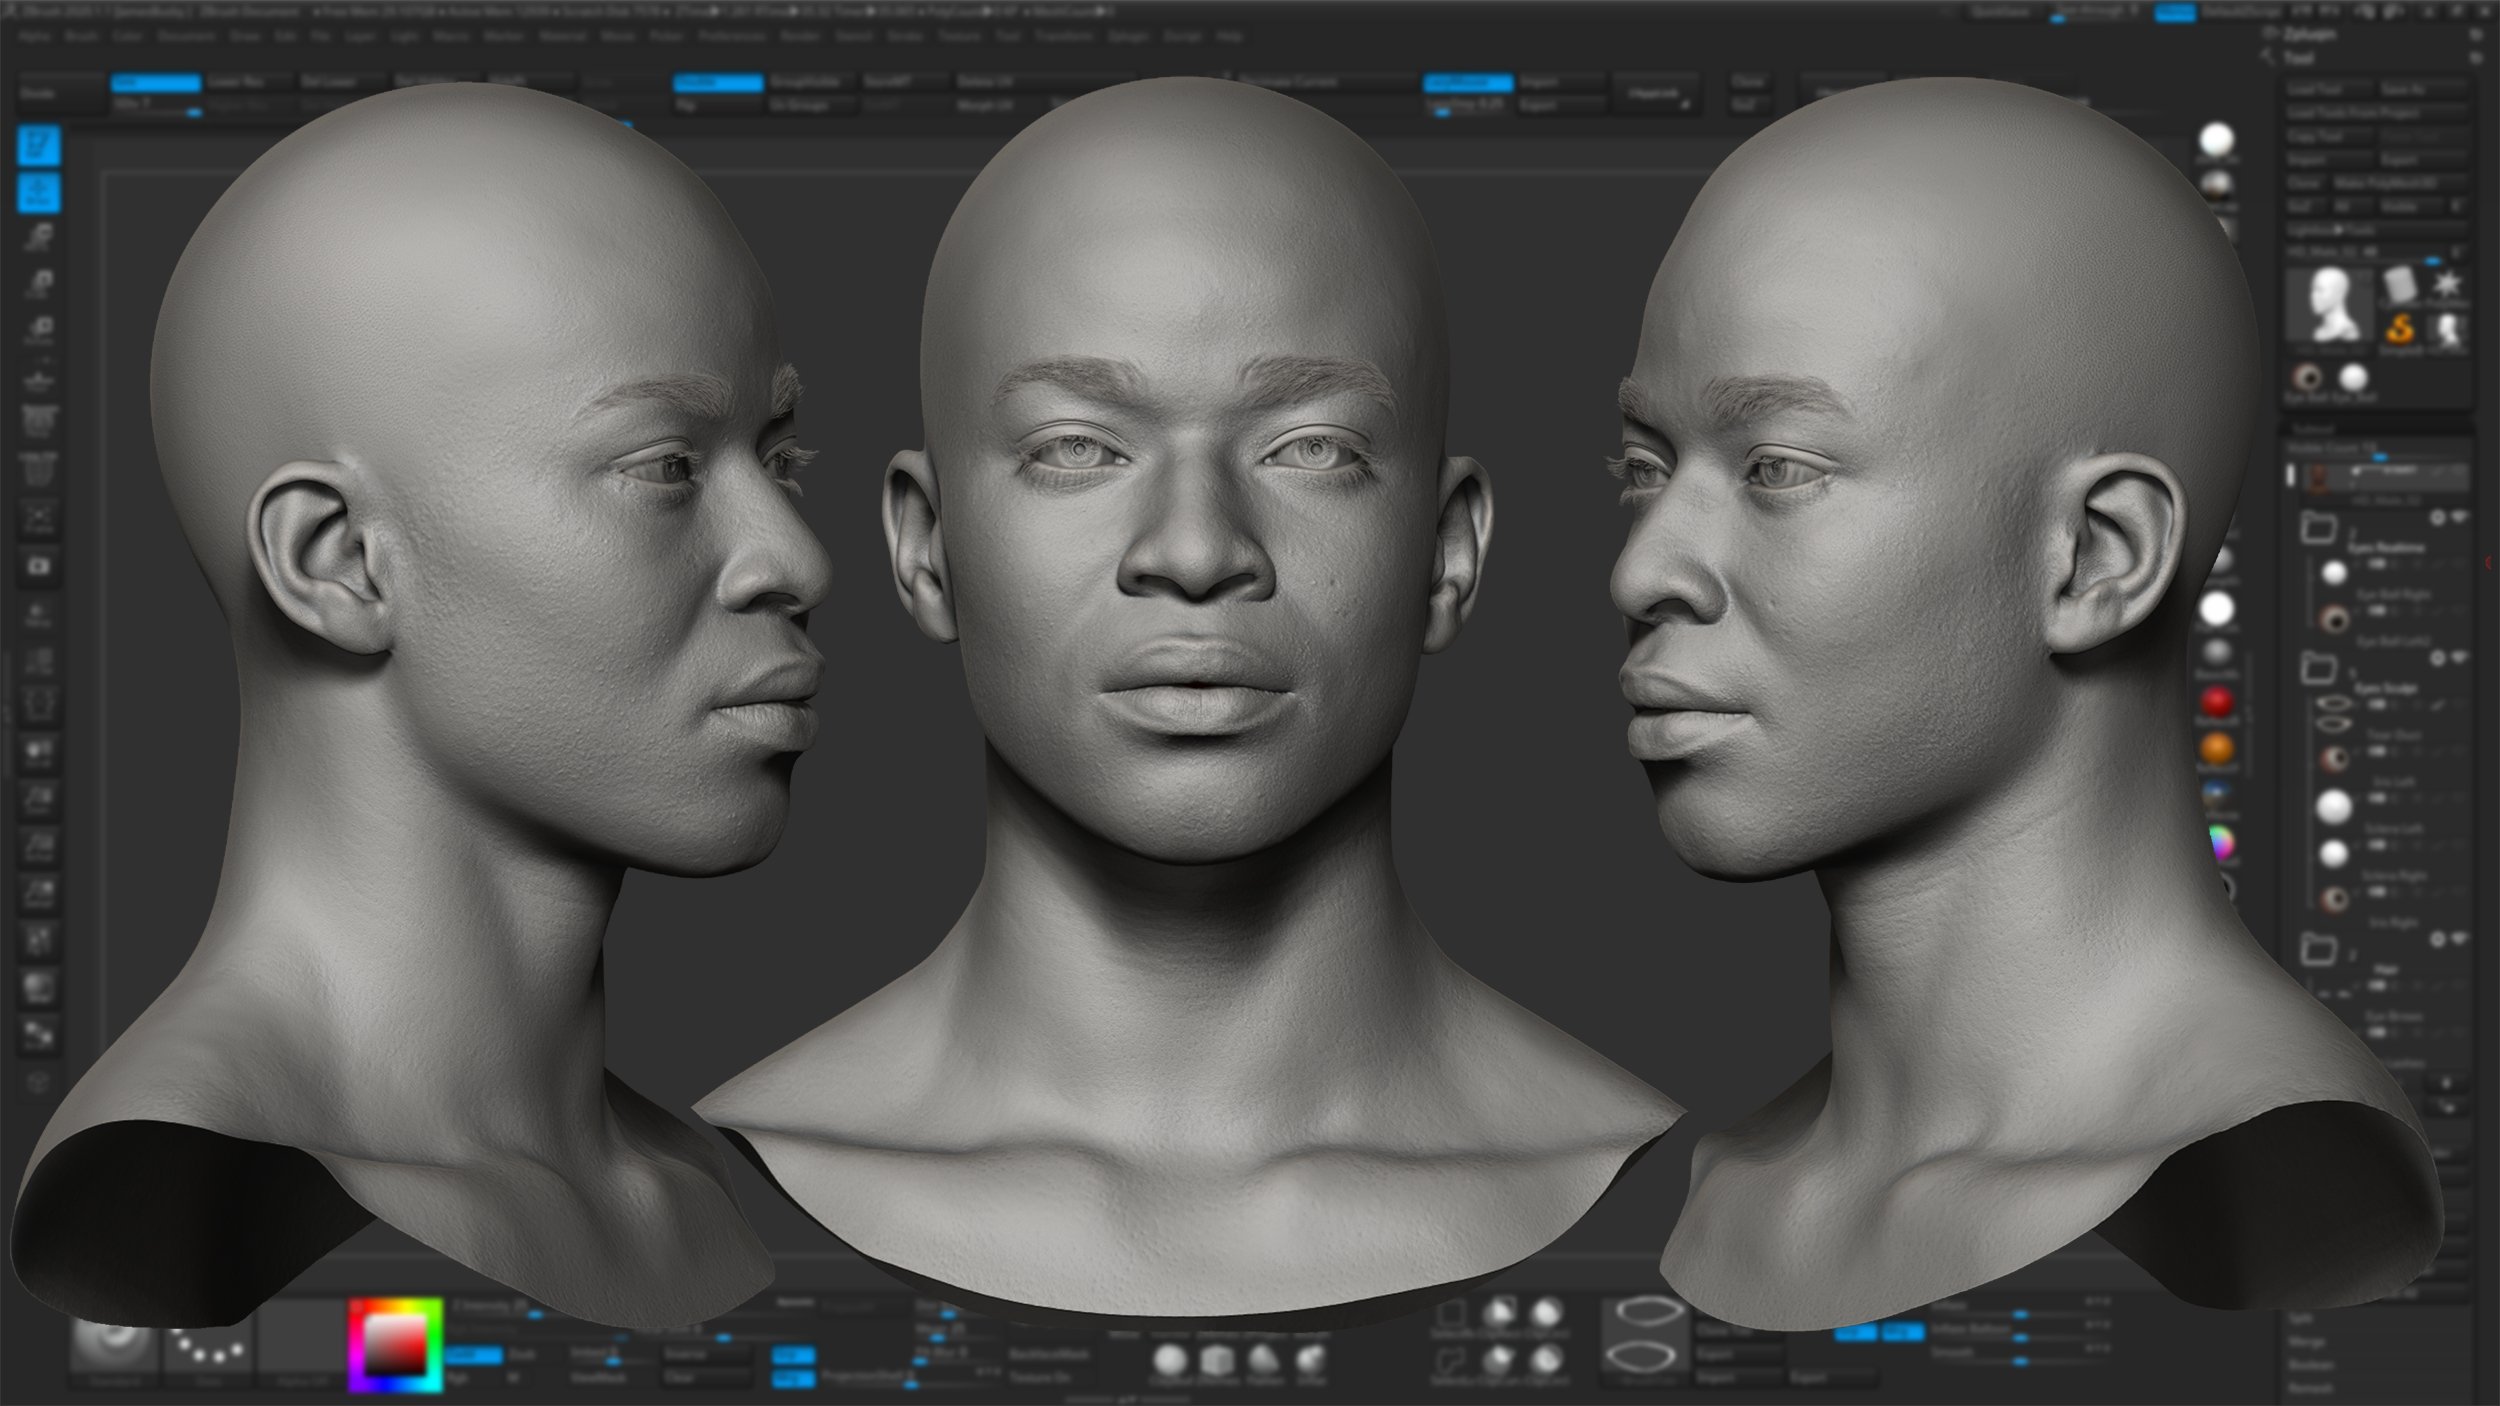 Realistic 3D Zbrush head model download